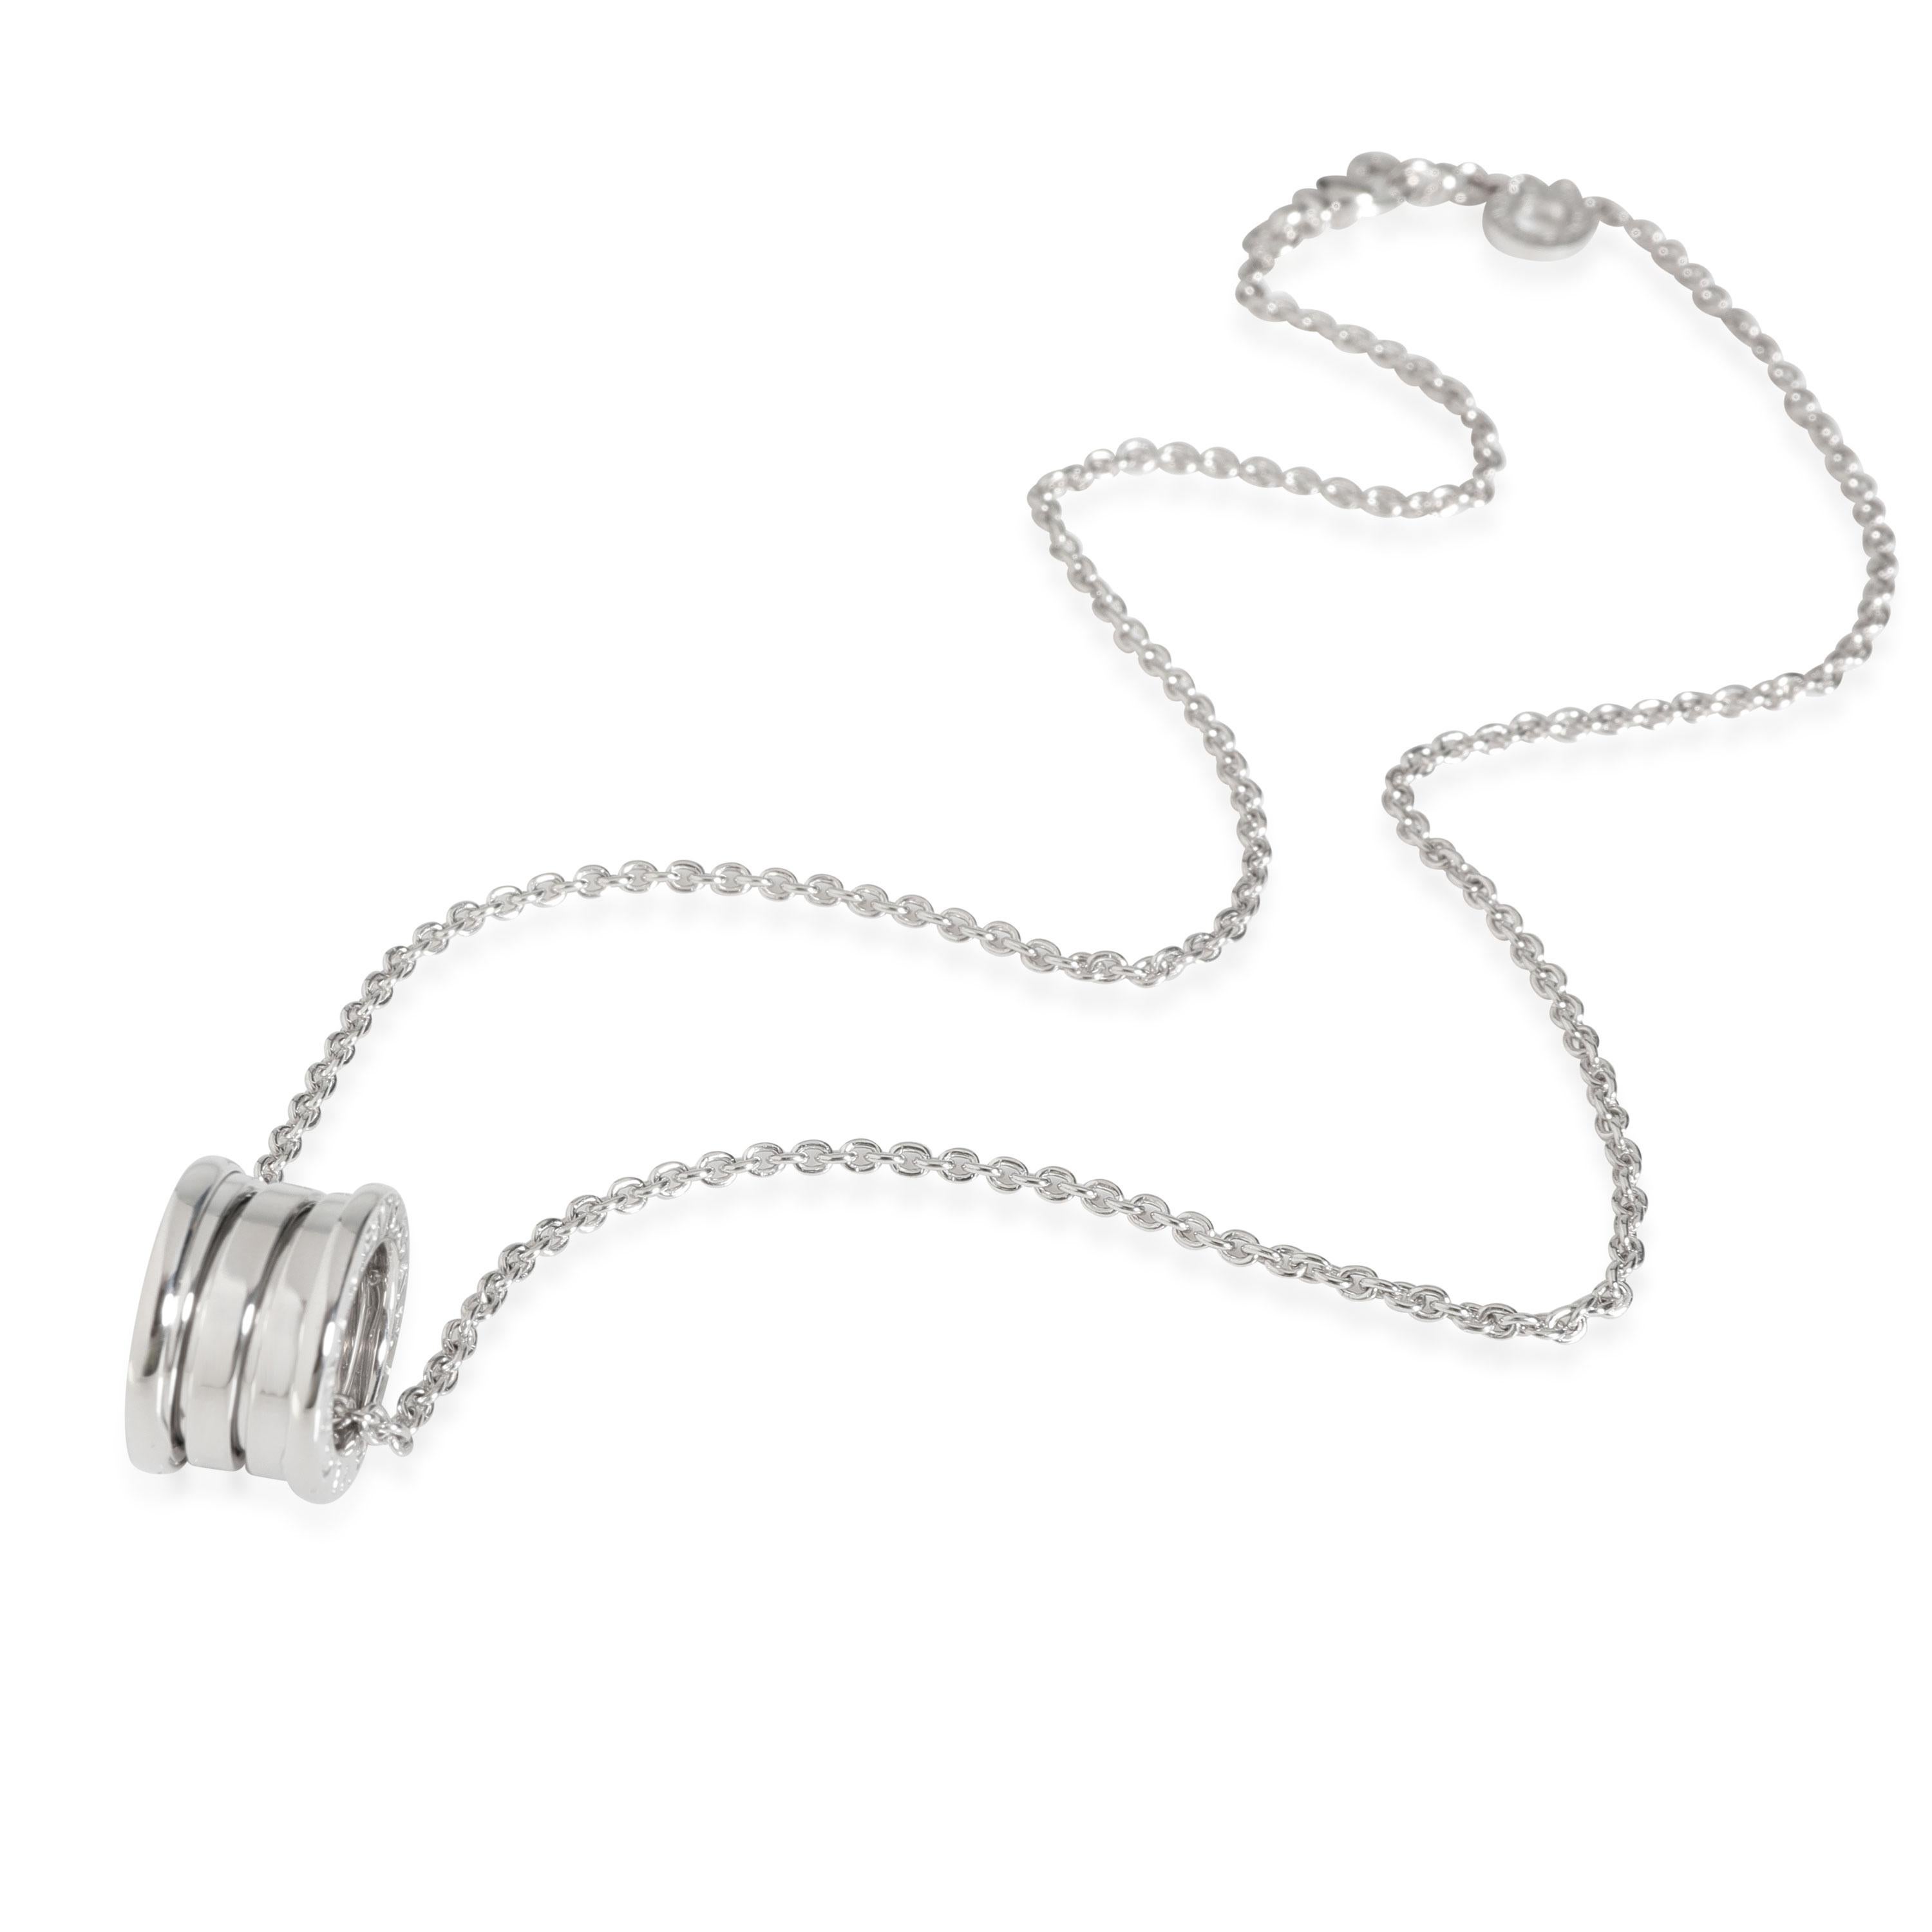 Bulgari B.Zero1 Pendant in 18k White Gold

PRIMARY DETAILS
SKU: 116565
Listing Title: Bulgari B.Zero1 Pendant in 18k White Gold
Condition Description: Retails for 3950 USD. In excellent condition and recently polished. Chain is 16 inches in